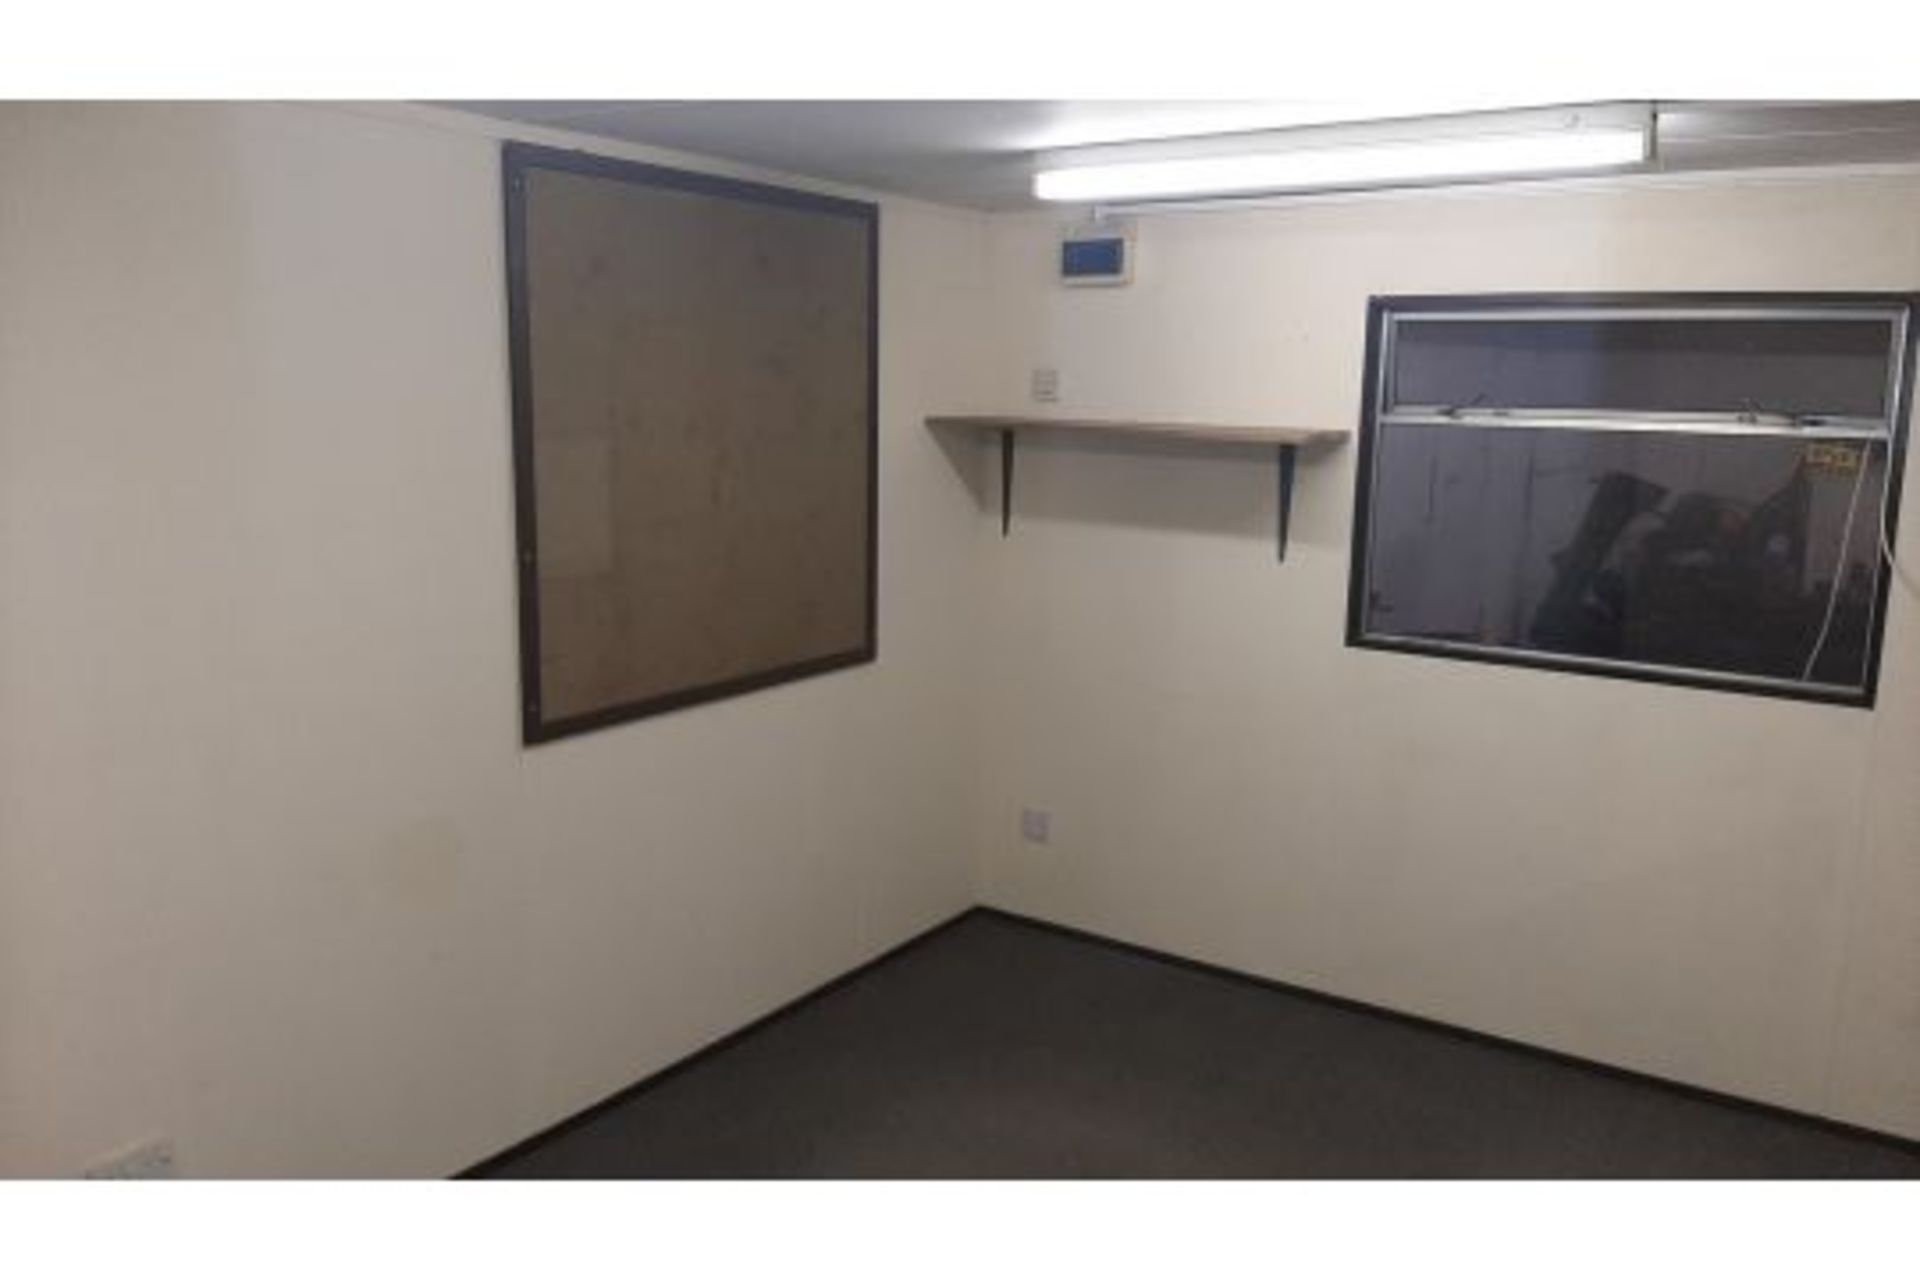 10ft x 32ft jack leg cabin. With two 10ftx 14ft rooms and hall. Used as office inside building. - Image 16 of 18